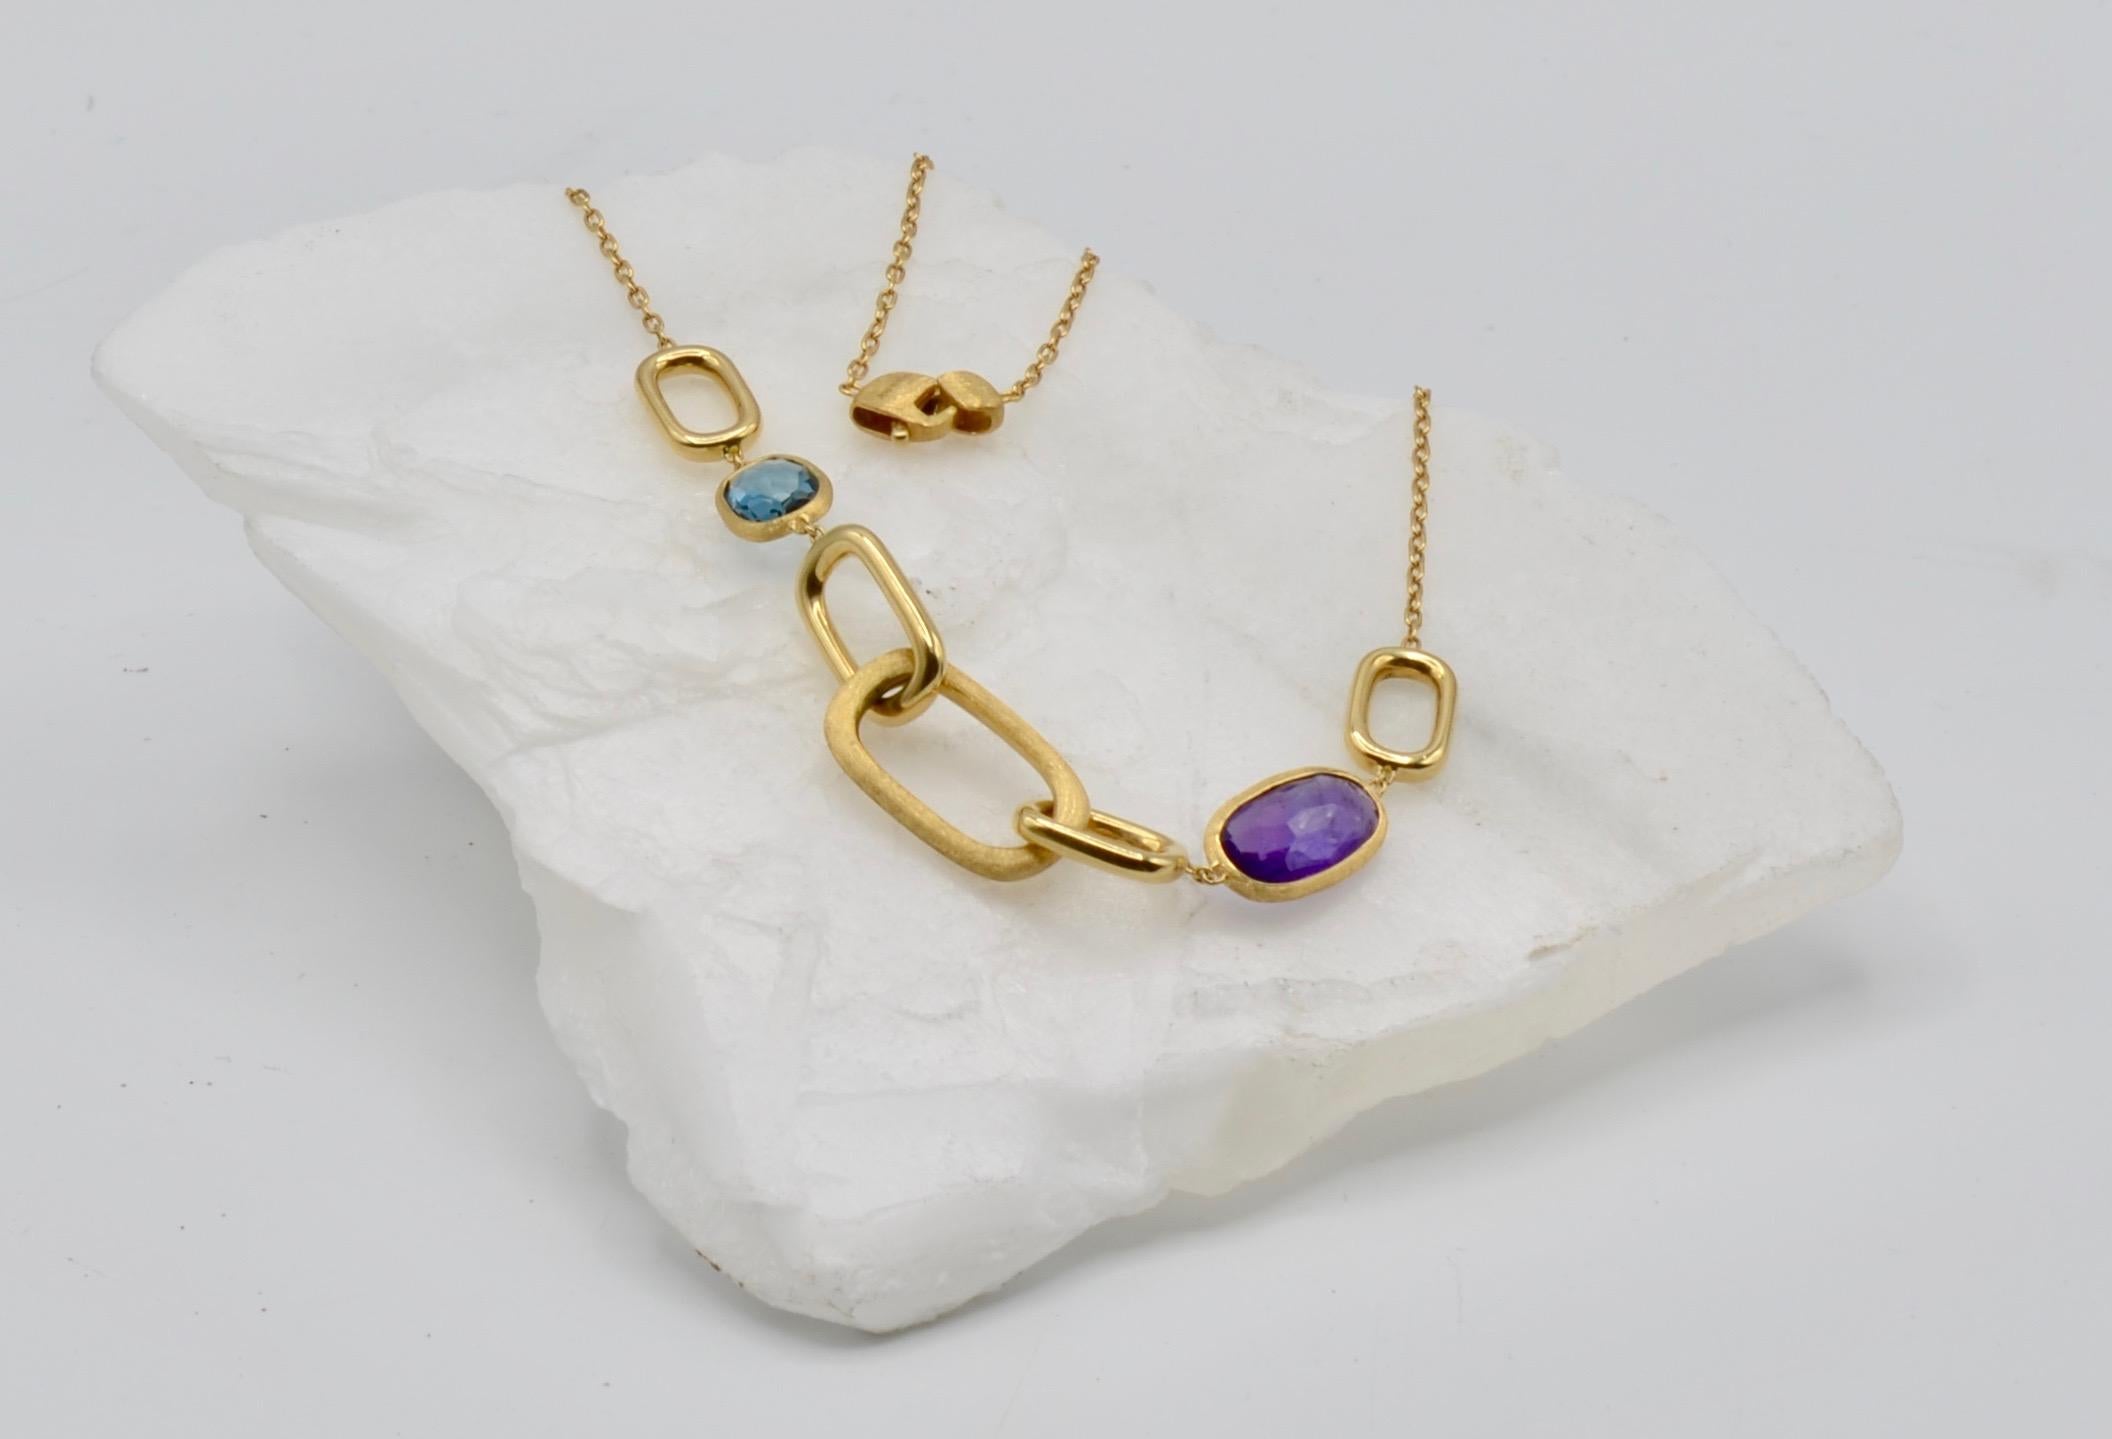 This elegant link is a signature of the designer Marco Bicego. The 18 karat brushed yellow gold is a perfect compliment to the amethyst and blue topaz faceted stones embedded in the link design. This is a perfect everyday necklace to wear alone or